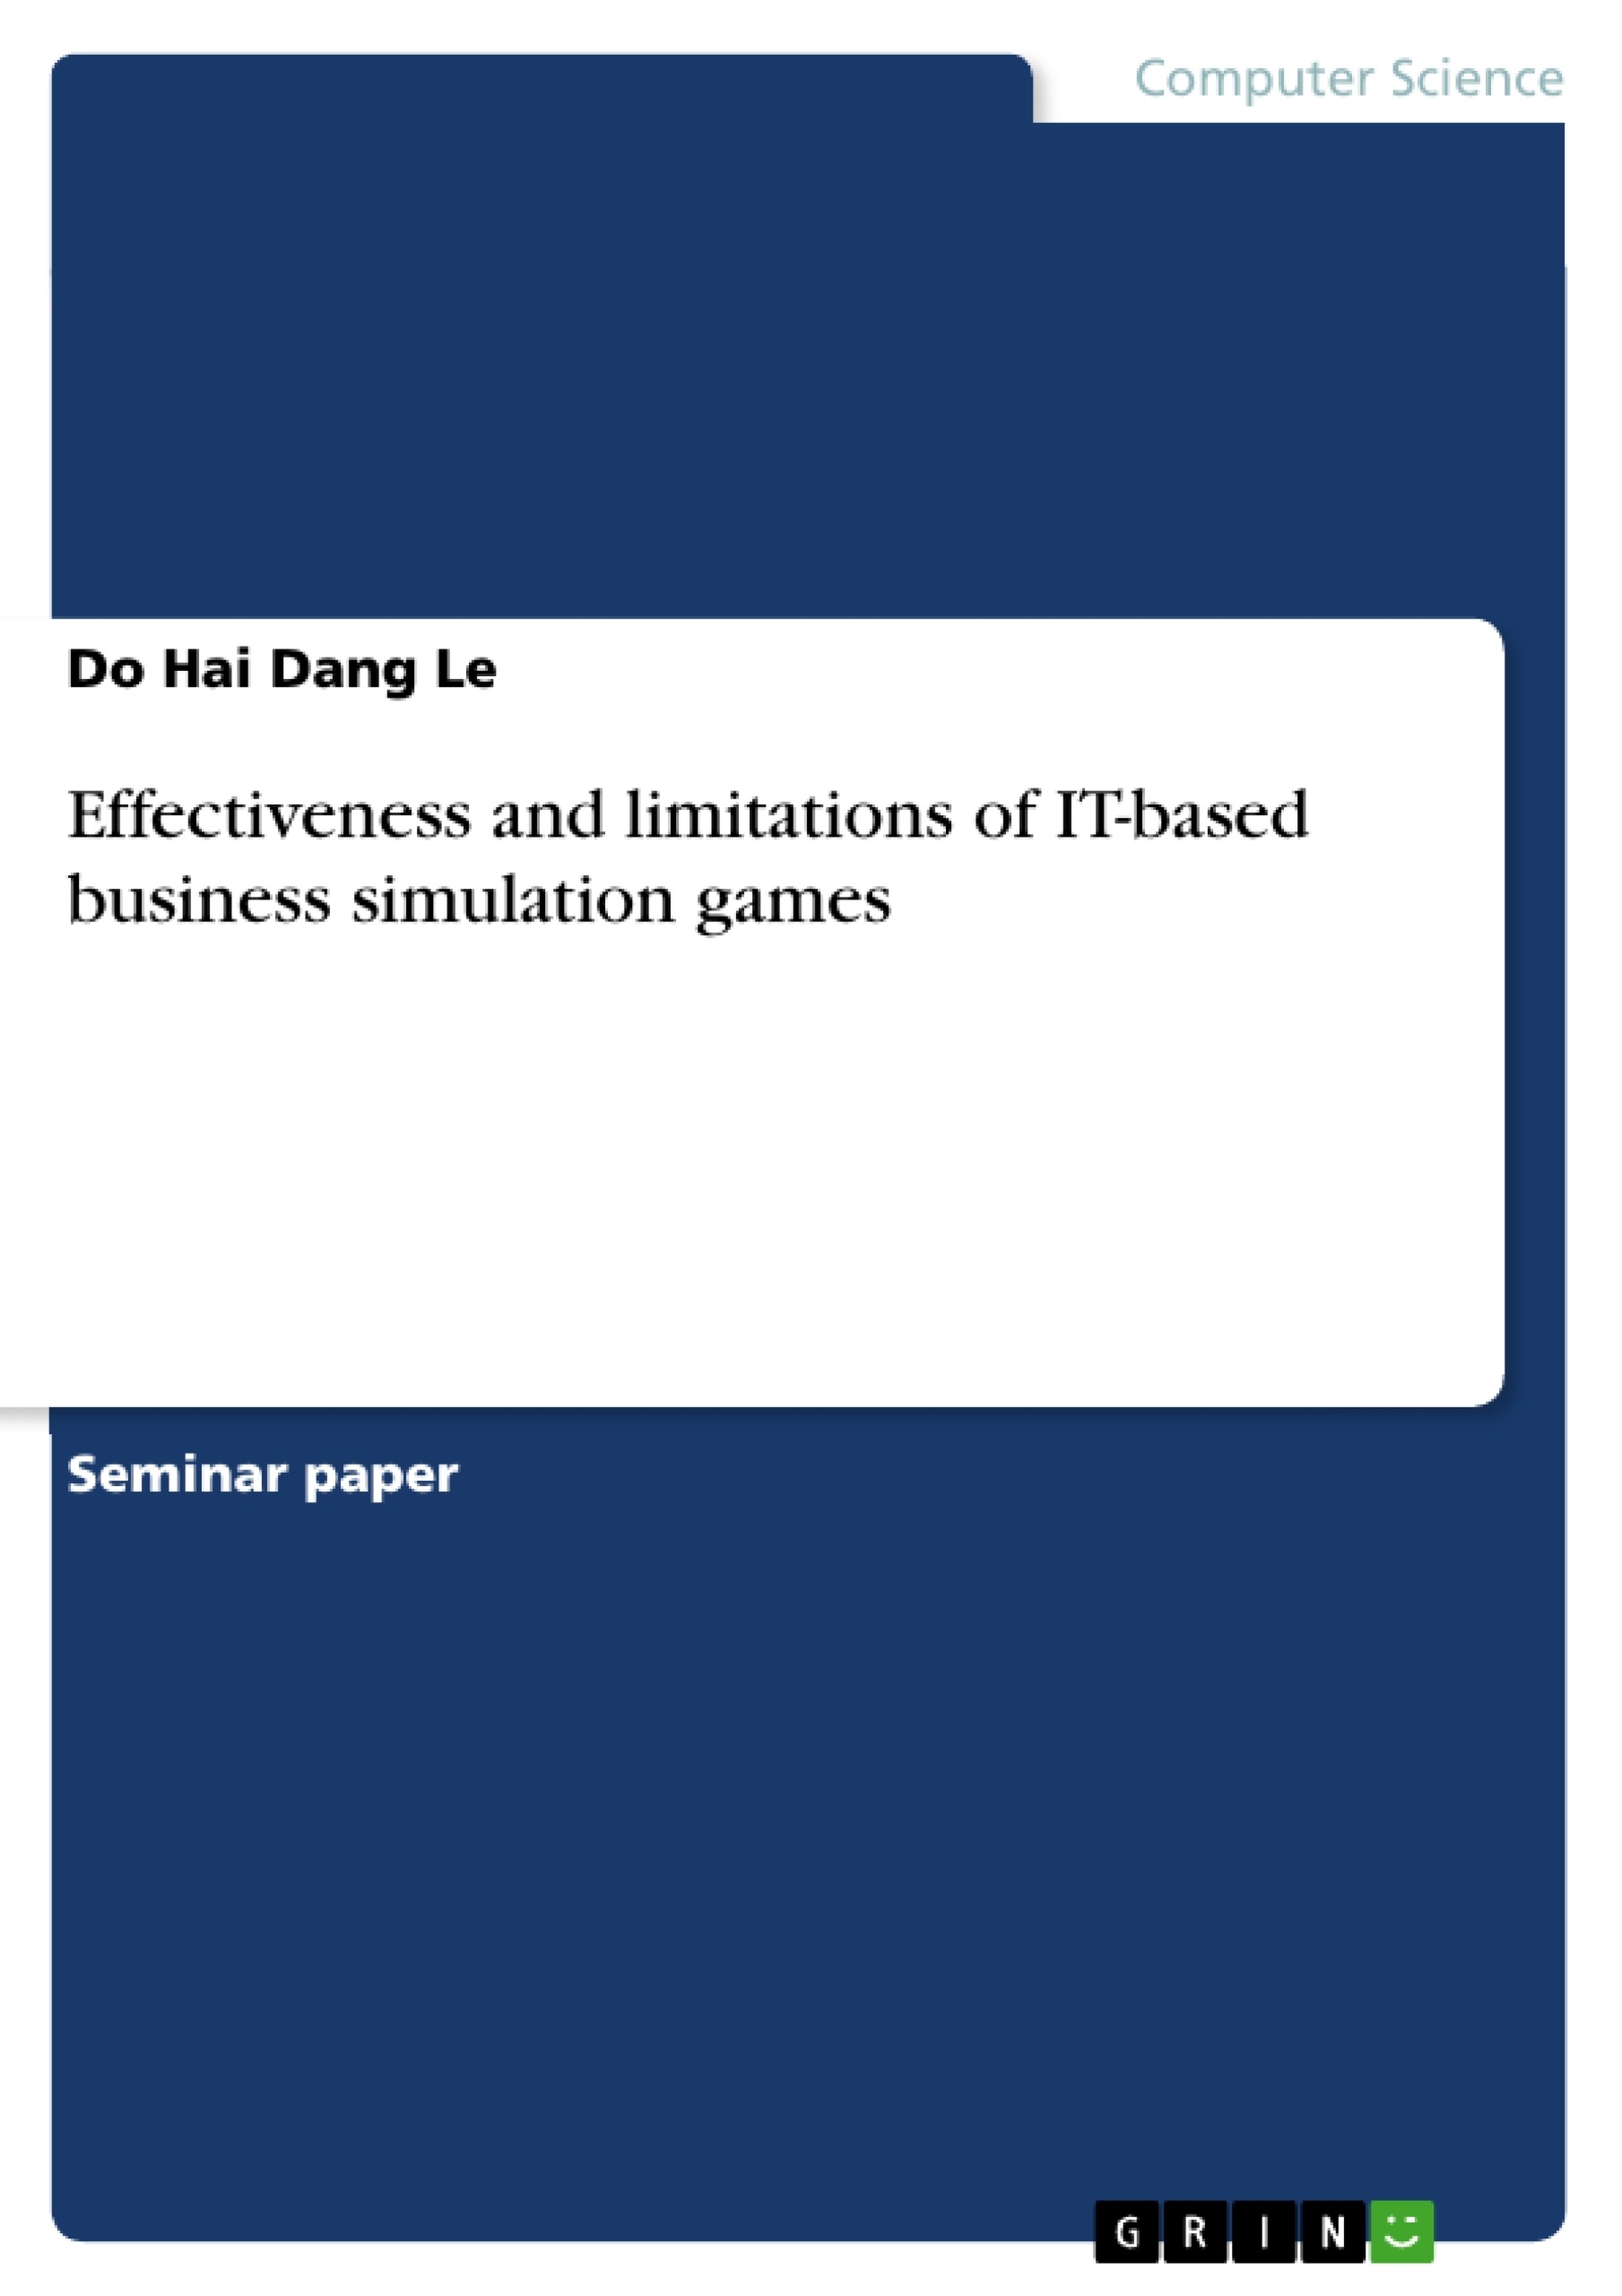 Title: Effectiveness and limitations of IT-based business simulation games